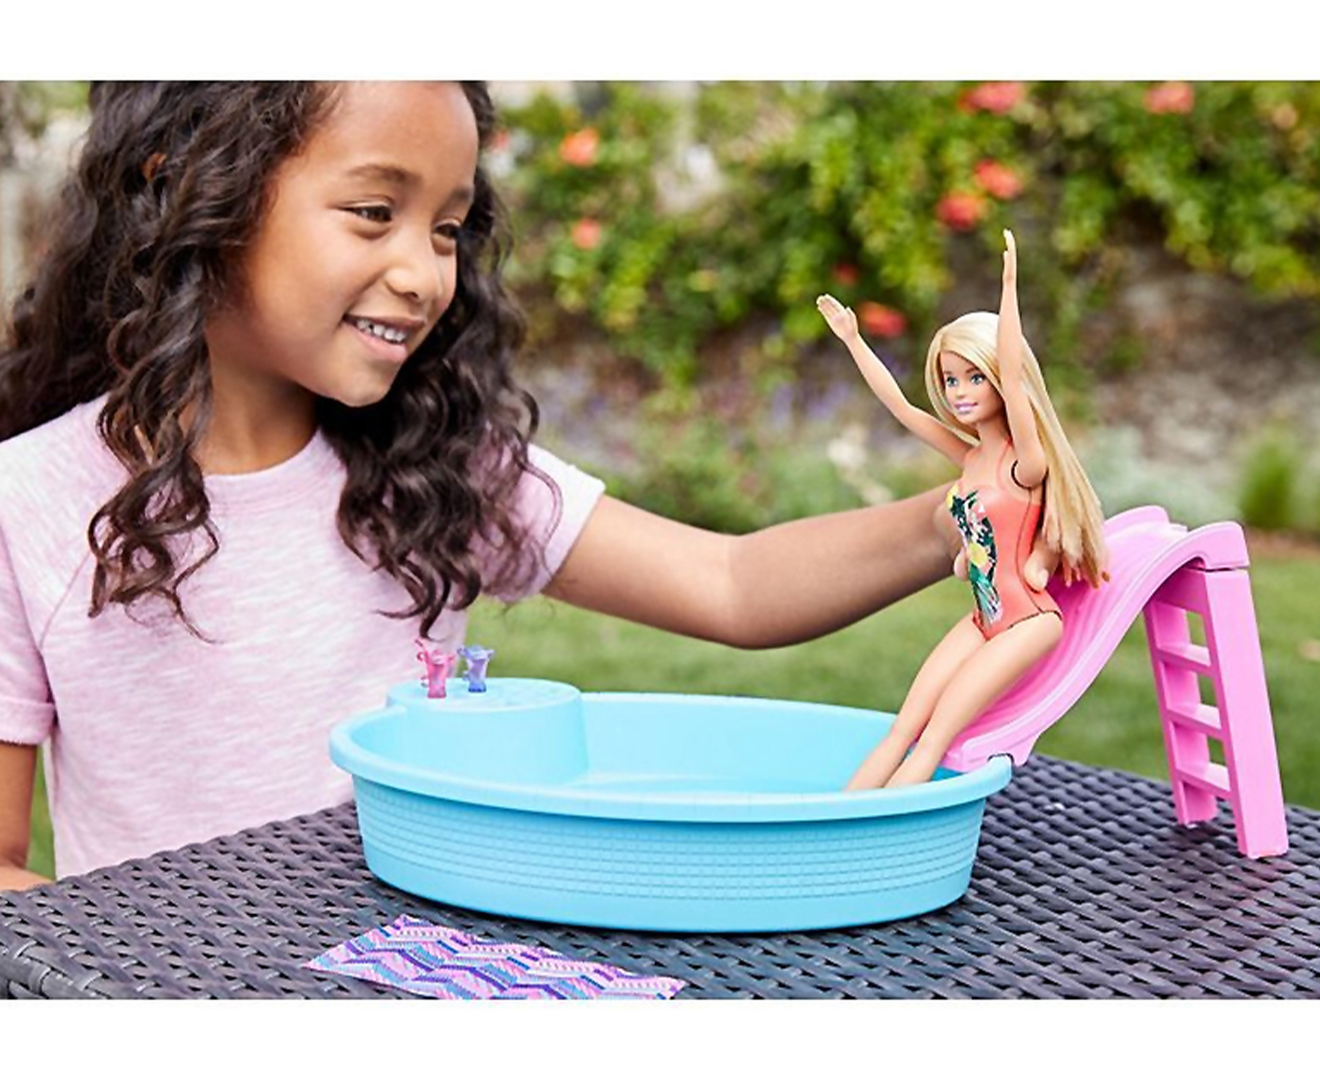 Barbie Doll And Pool Playset Catch Co Nz